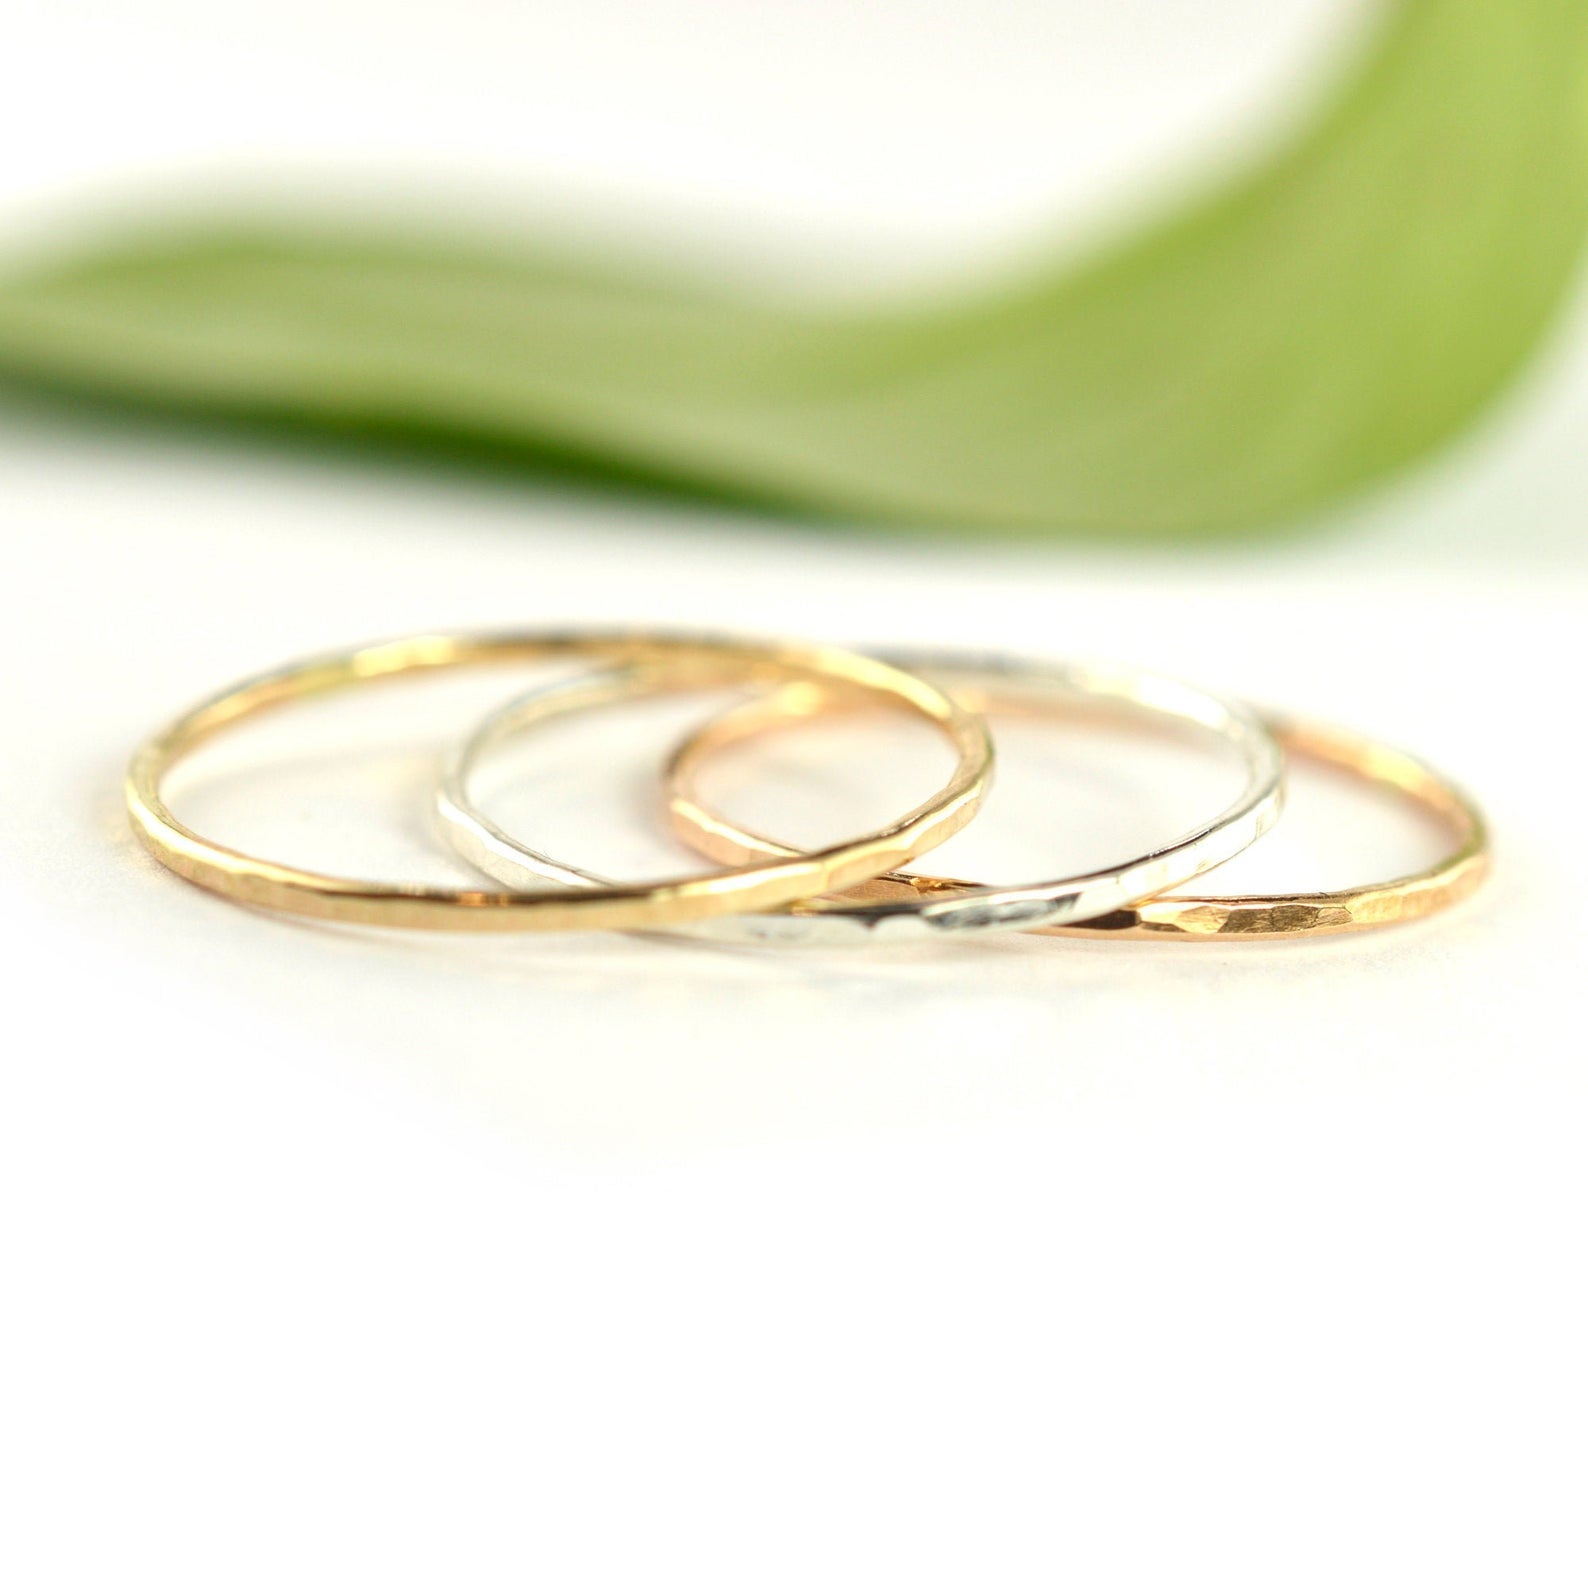 Size 8 / Mix Metal Stackable Rings Set of 3